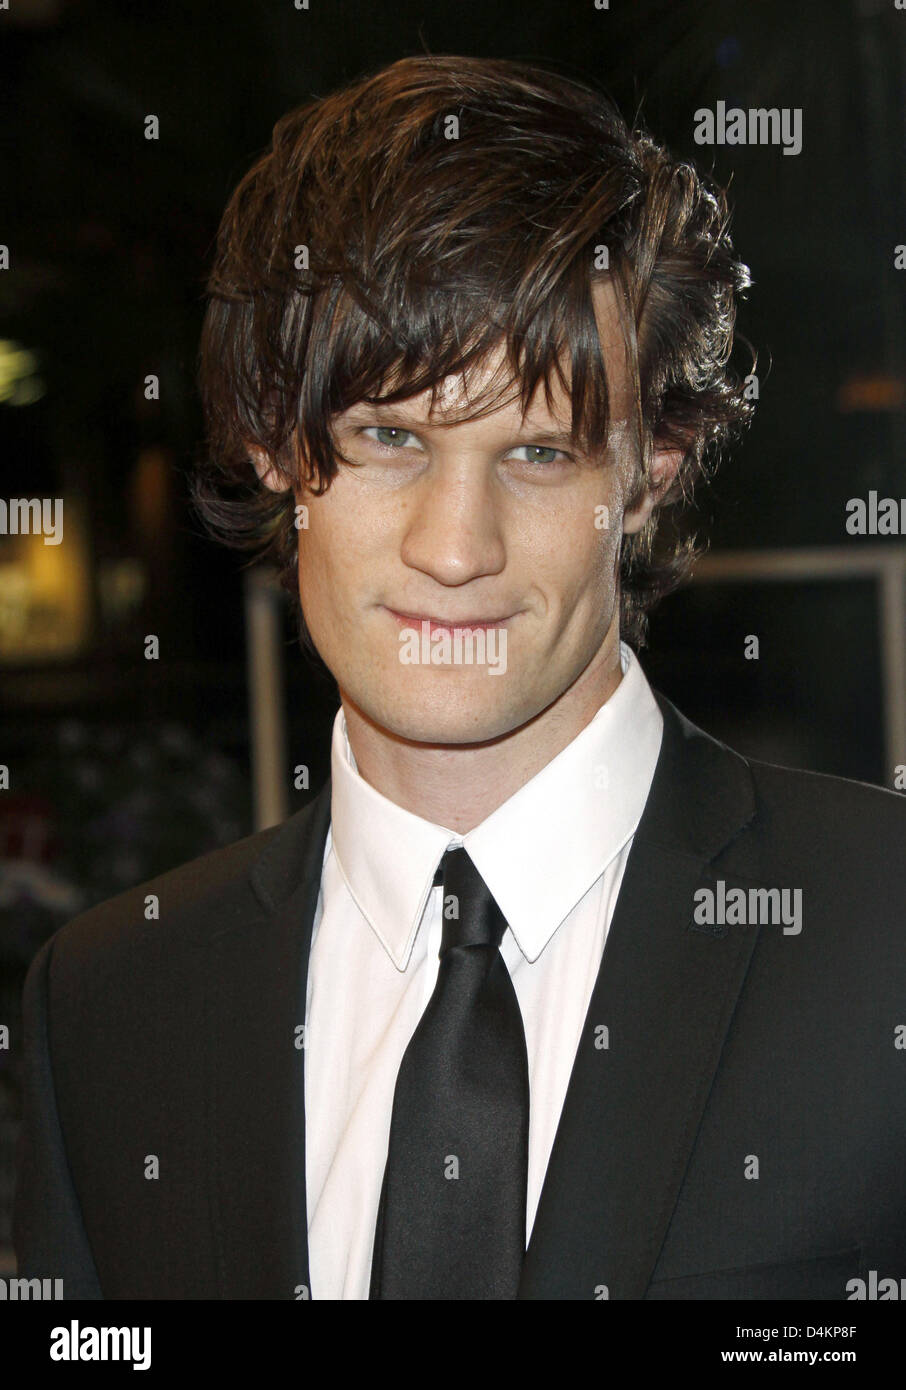 British actor Matt Smith arrives at the premiere of the film ?Fish Tank? which runs in competition at the 62nd Cannes Film Festival in Cannes, France, 14 May 2009. The film festival will take place from 13 until 24 May 2009. Photo: Hubert Boesl Stock Photo